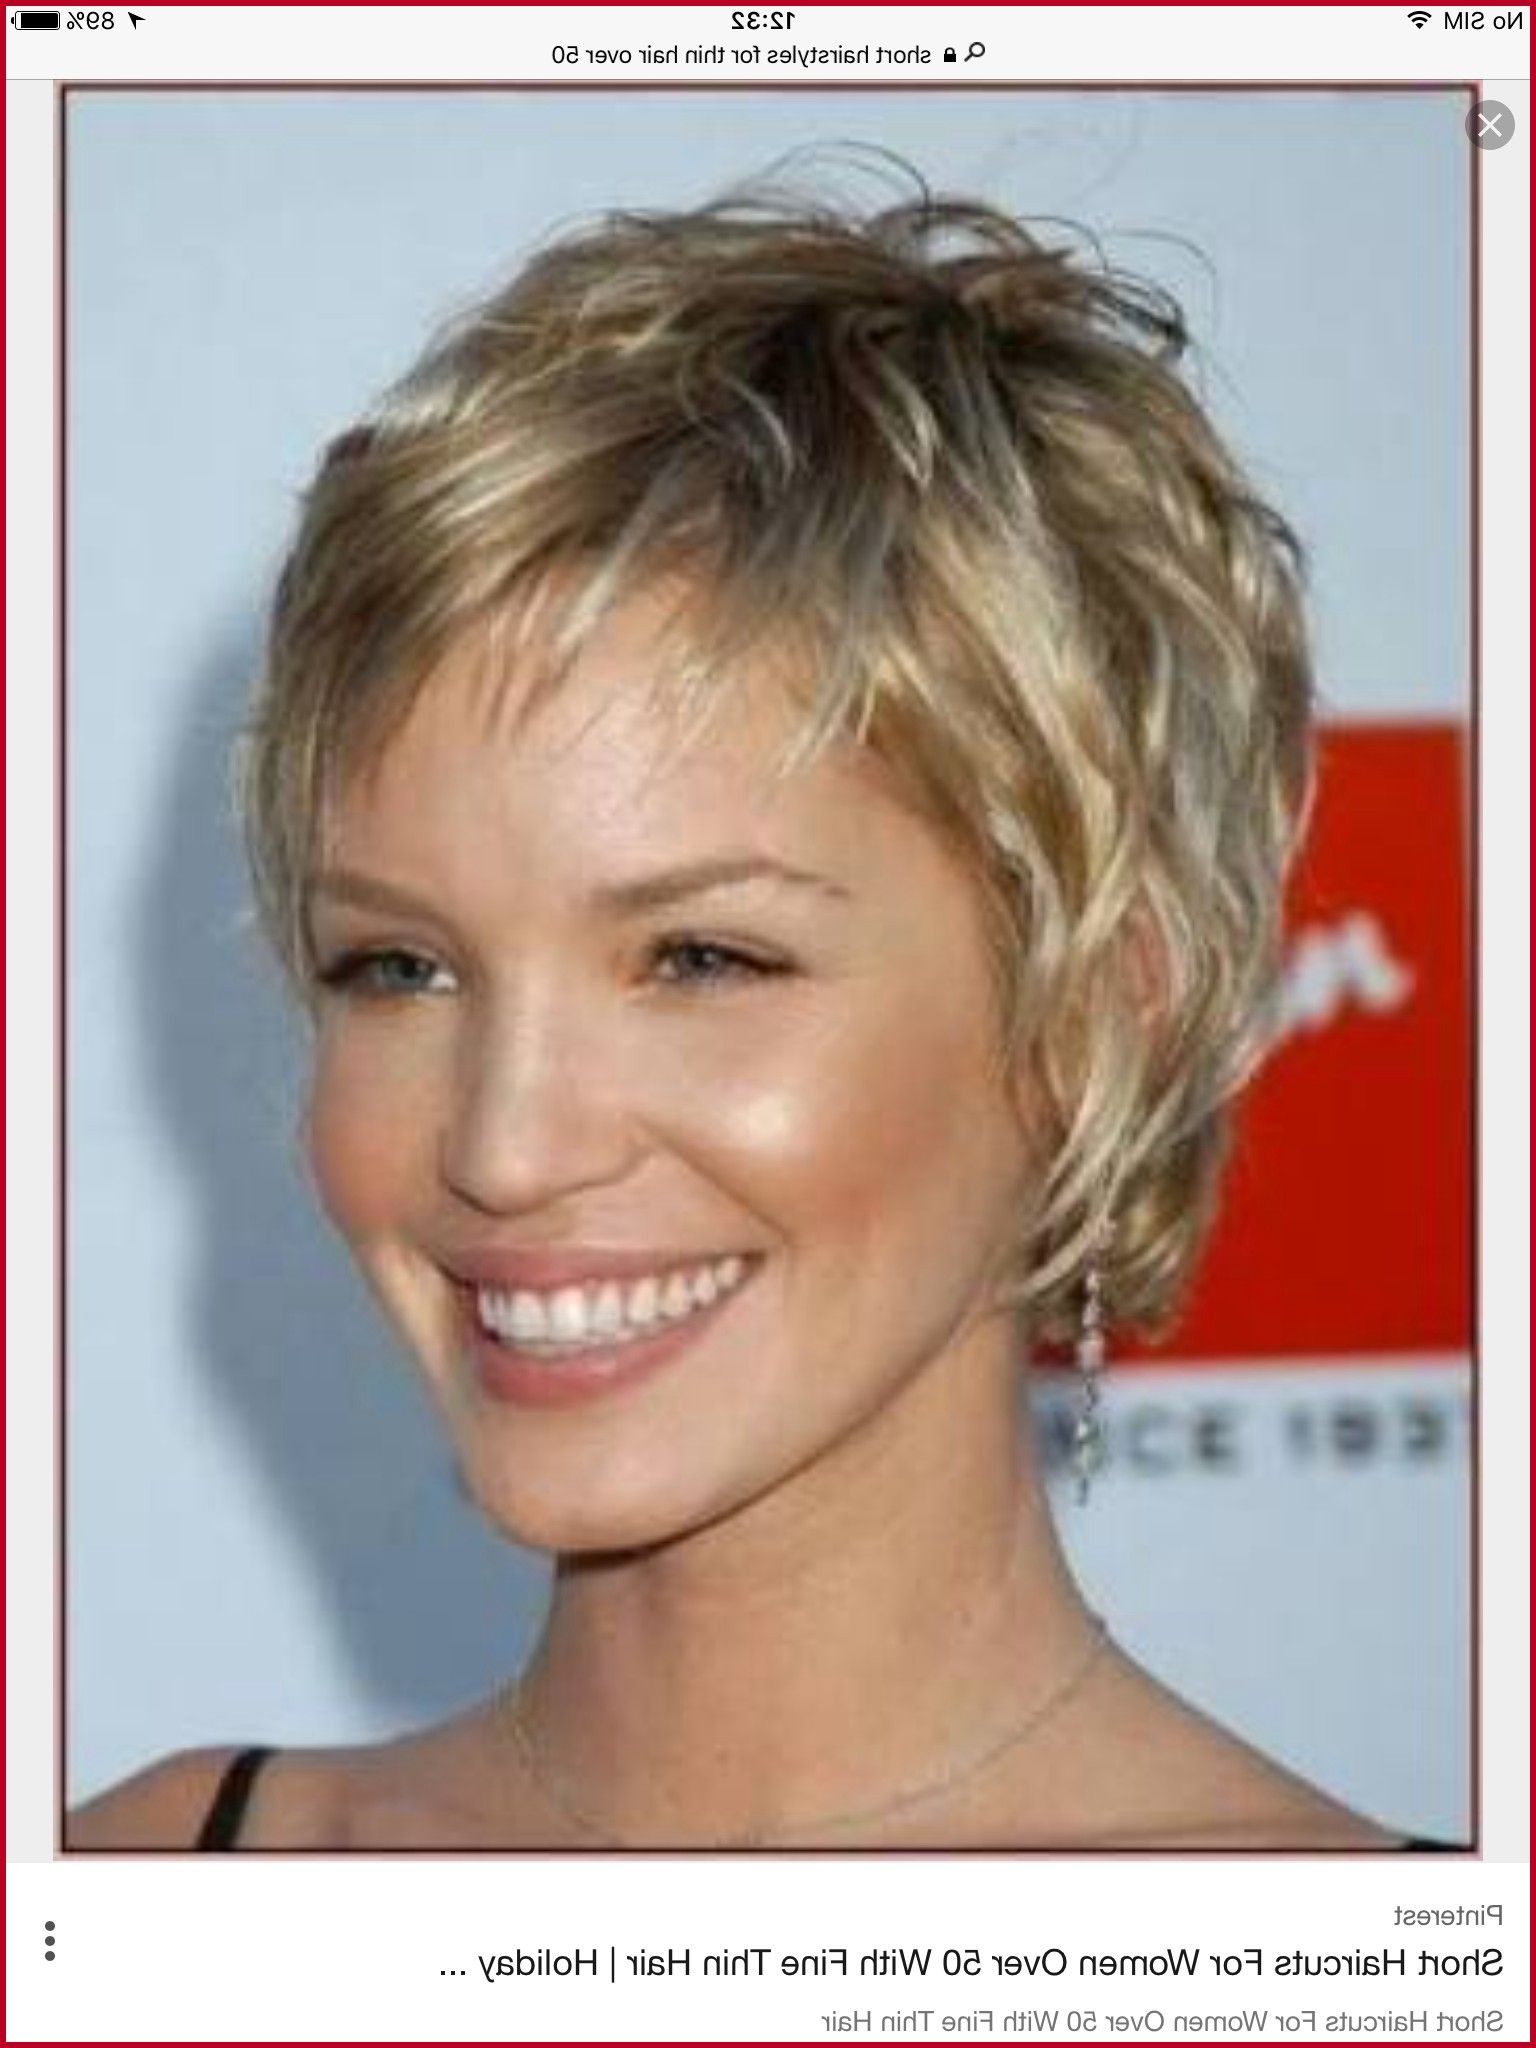 Short Hairstyles For Fine Hair Oval Face 448575 Shortirstyles For Inside Short Hairstyles For Fine Hair And Oval Face (View 17 of 25)